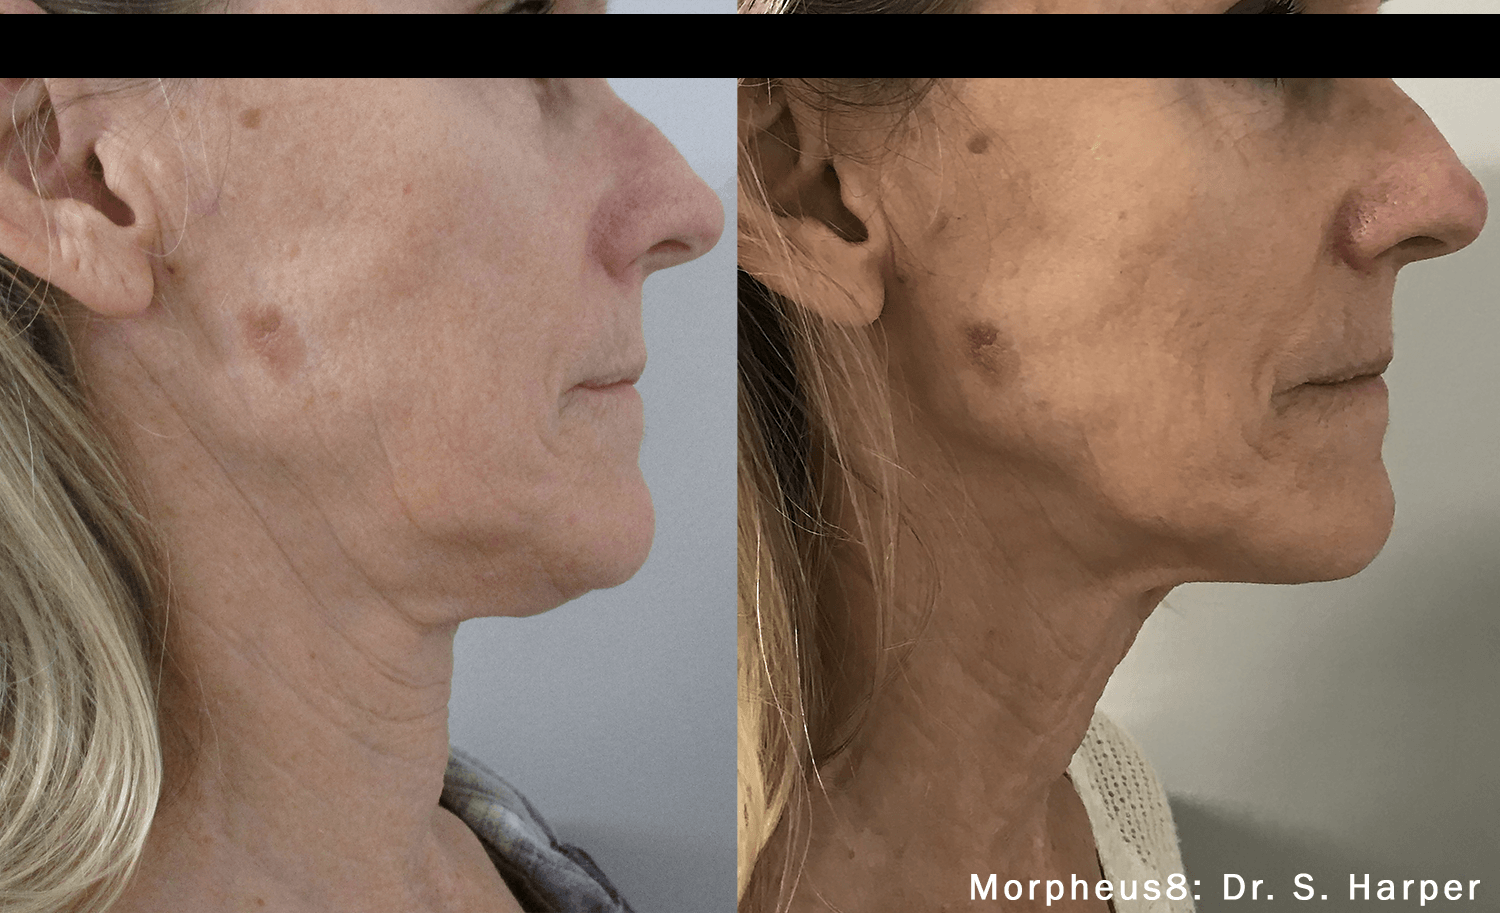 patient's face Before and After Morpheus8 Treatment